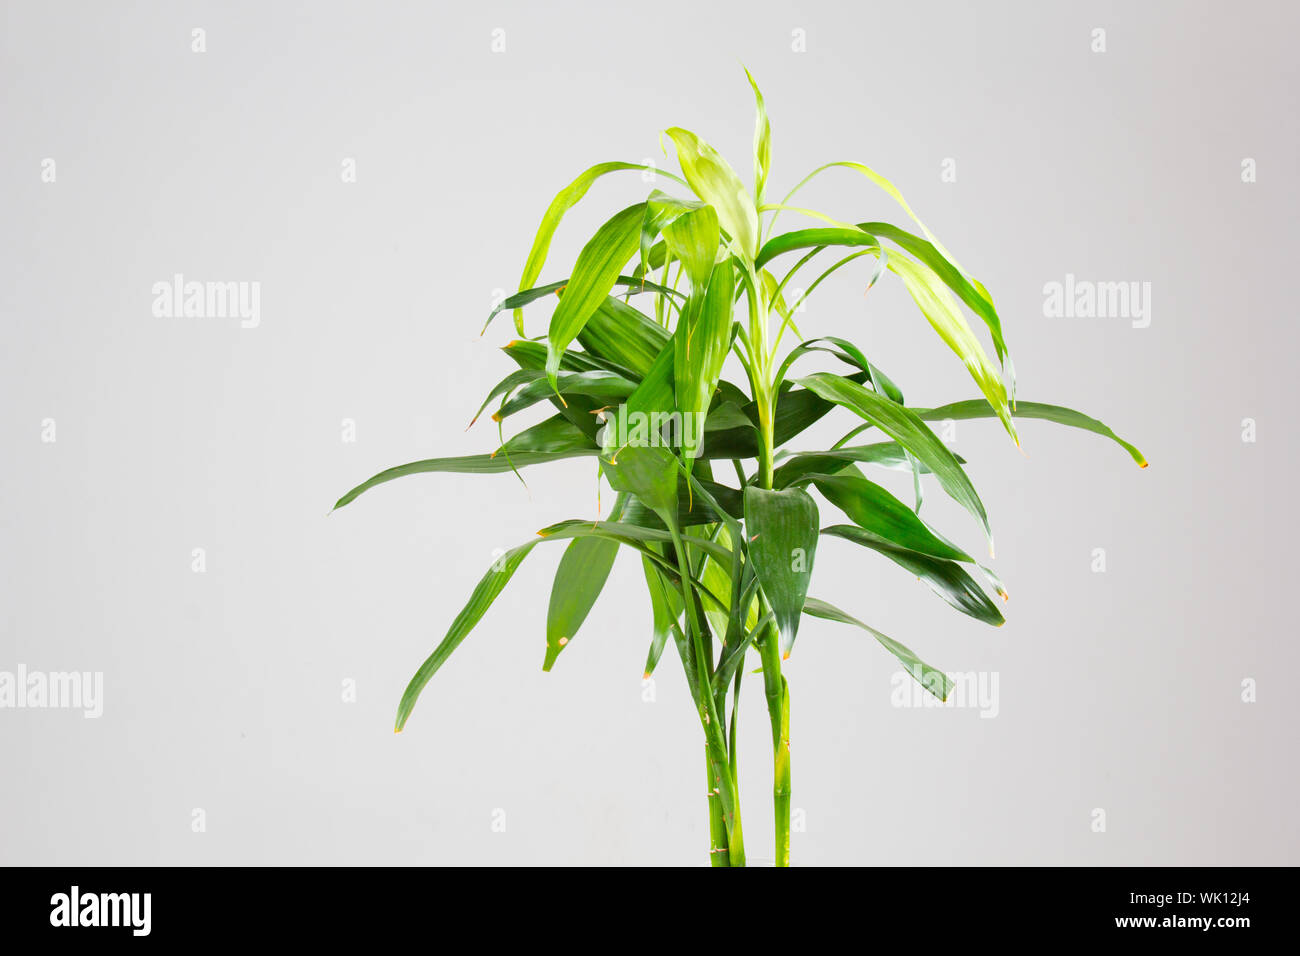 Bamboo plant on a table Stock Photo